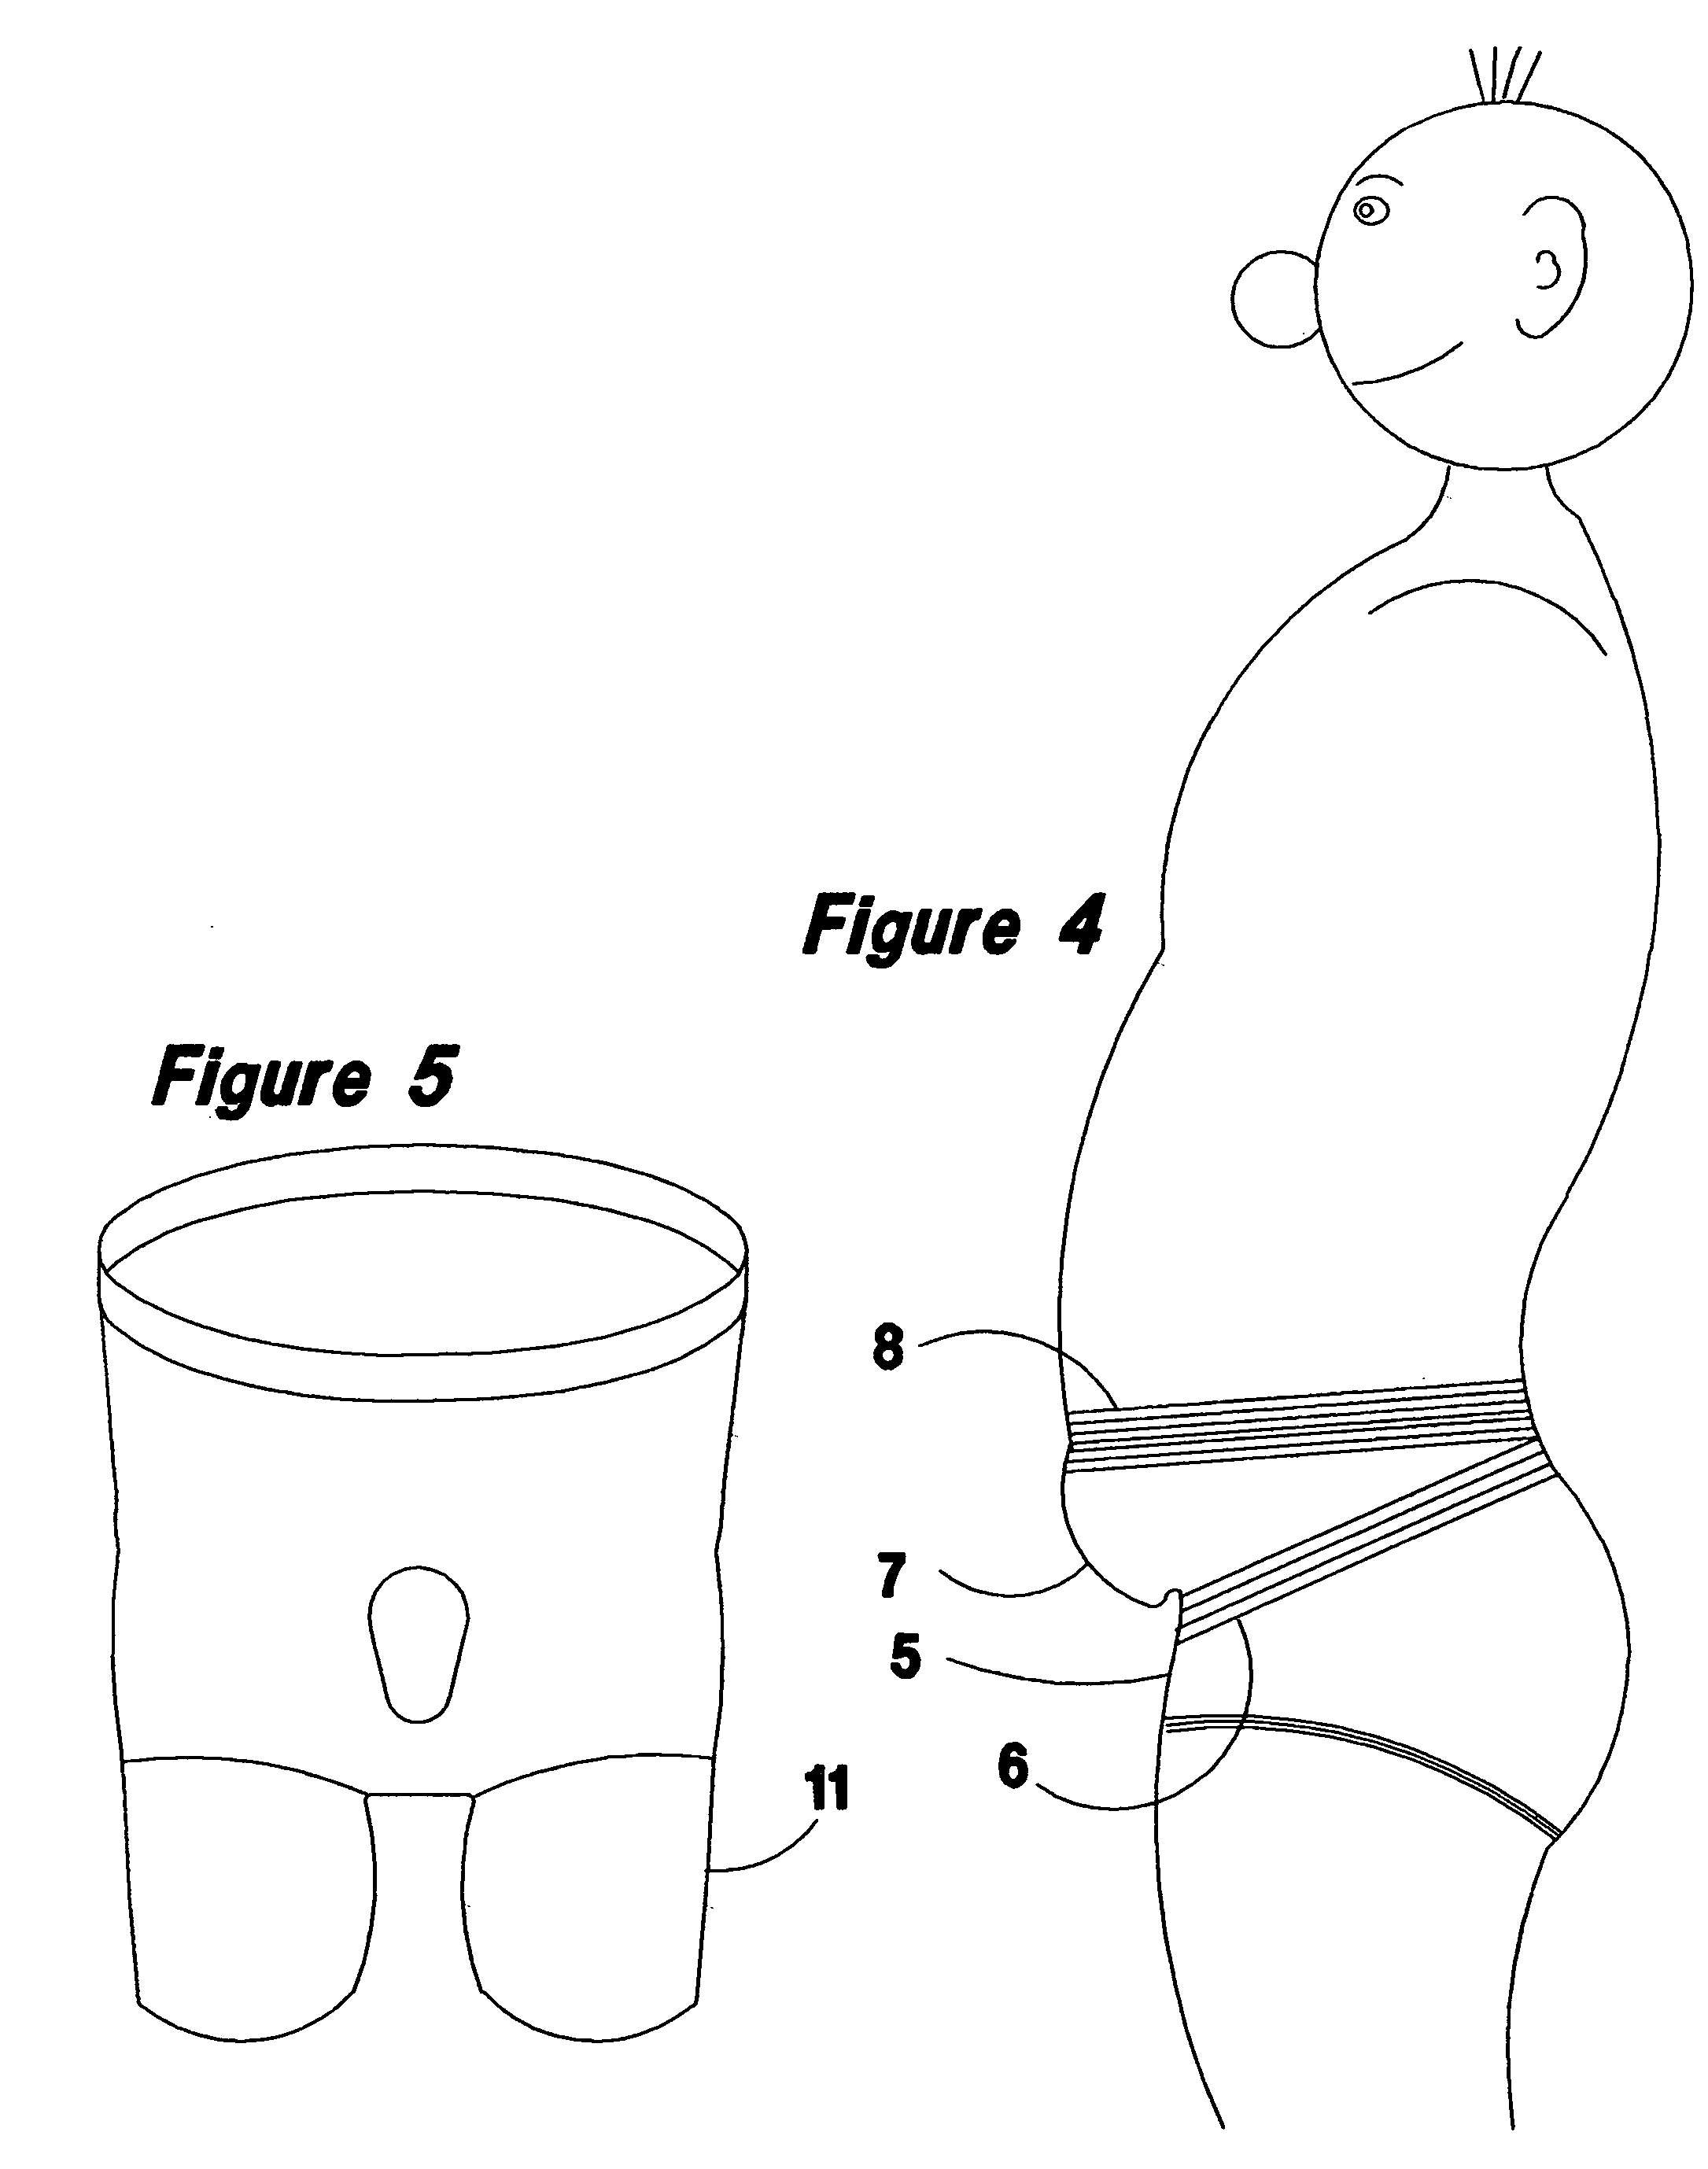 Undergarment for hernia relief and other purposes